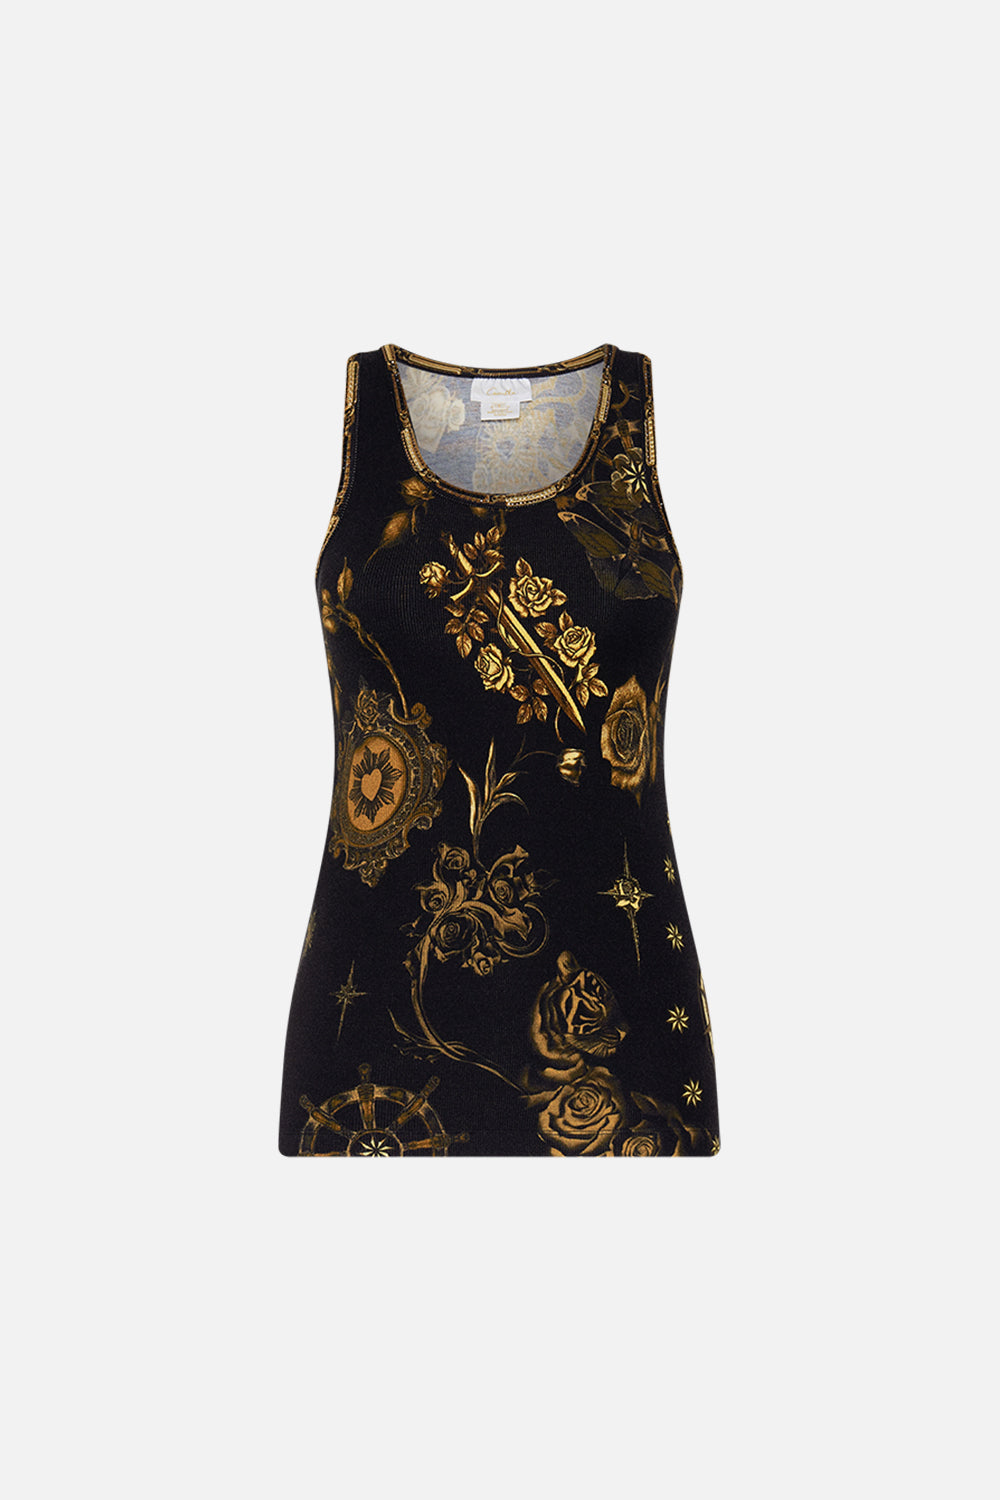 CAMILLA black jersey scoop neck tank top in So Says The Oracle print.